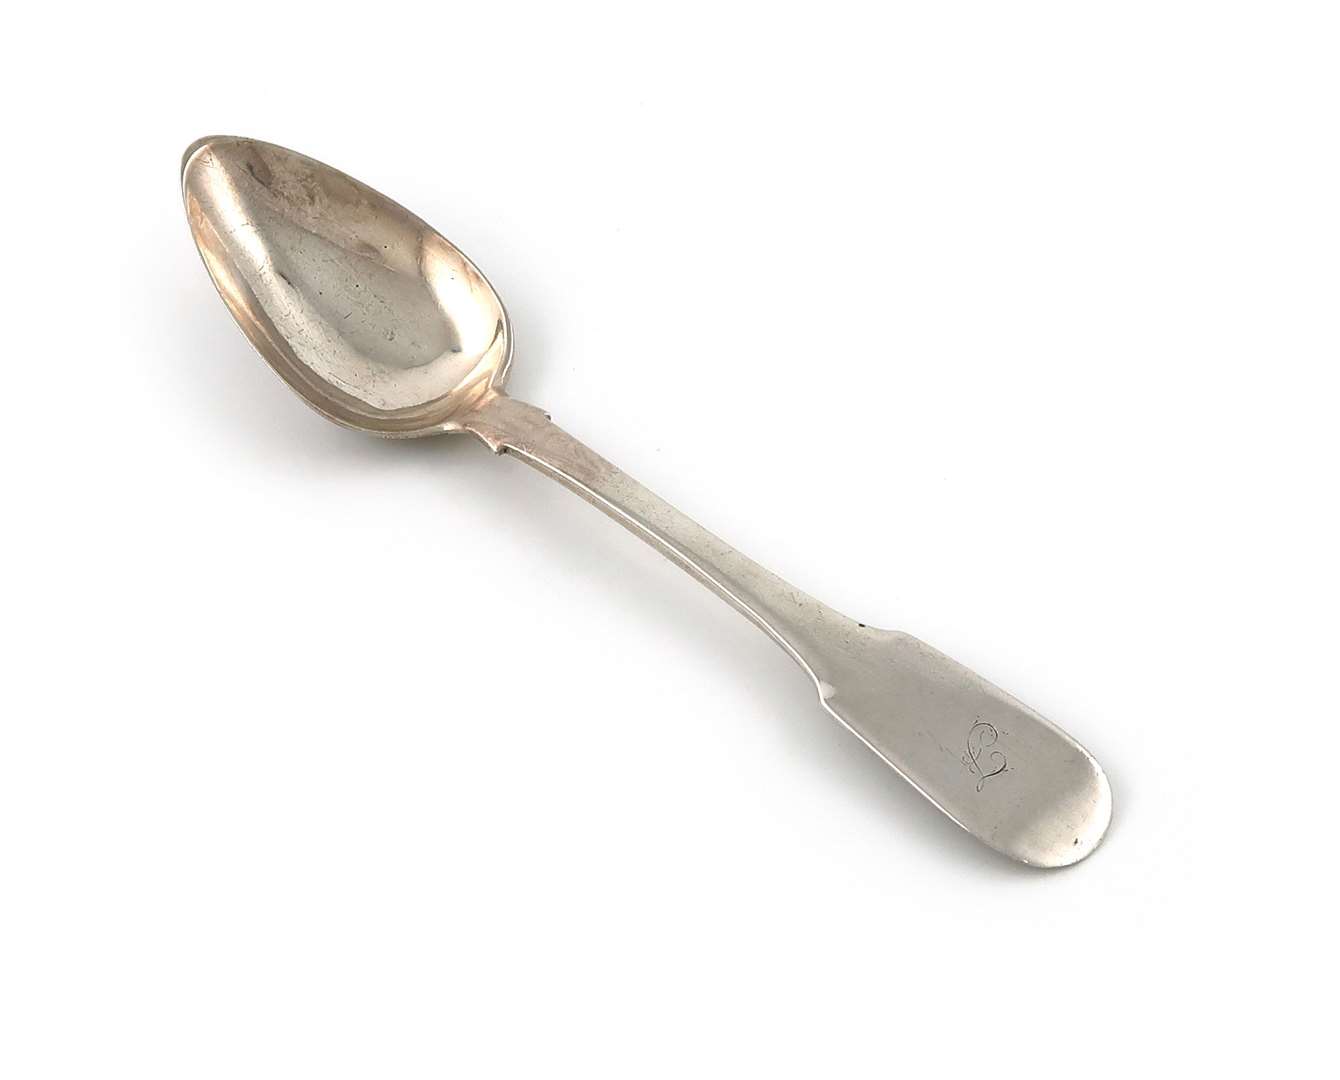 The silver dessert spoon made by Forres silversmith Robert Stuart in 1840.